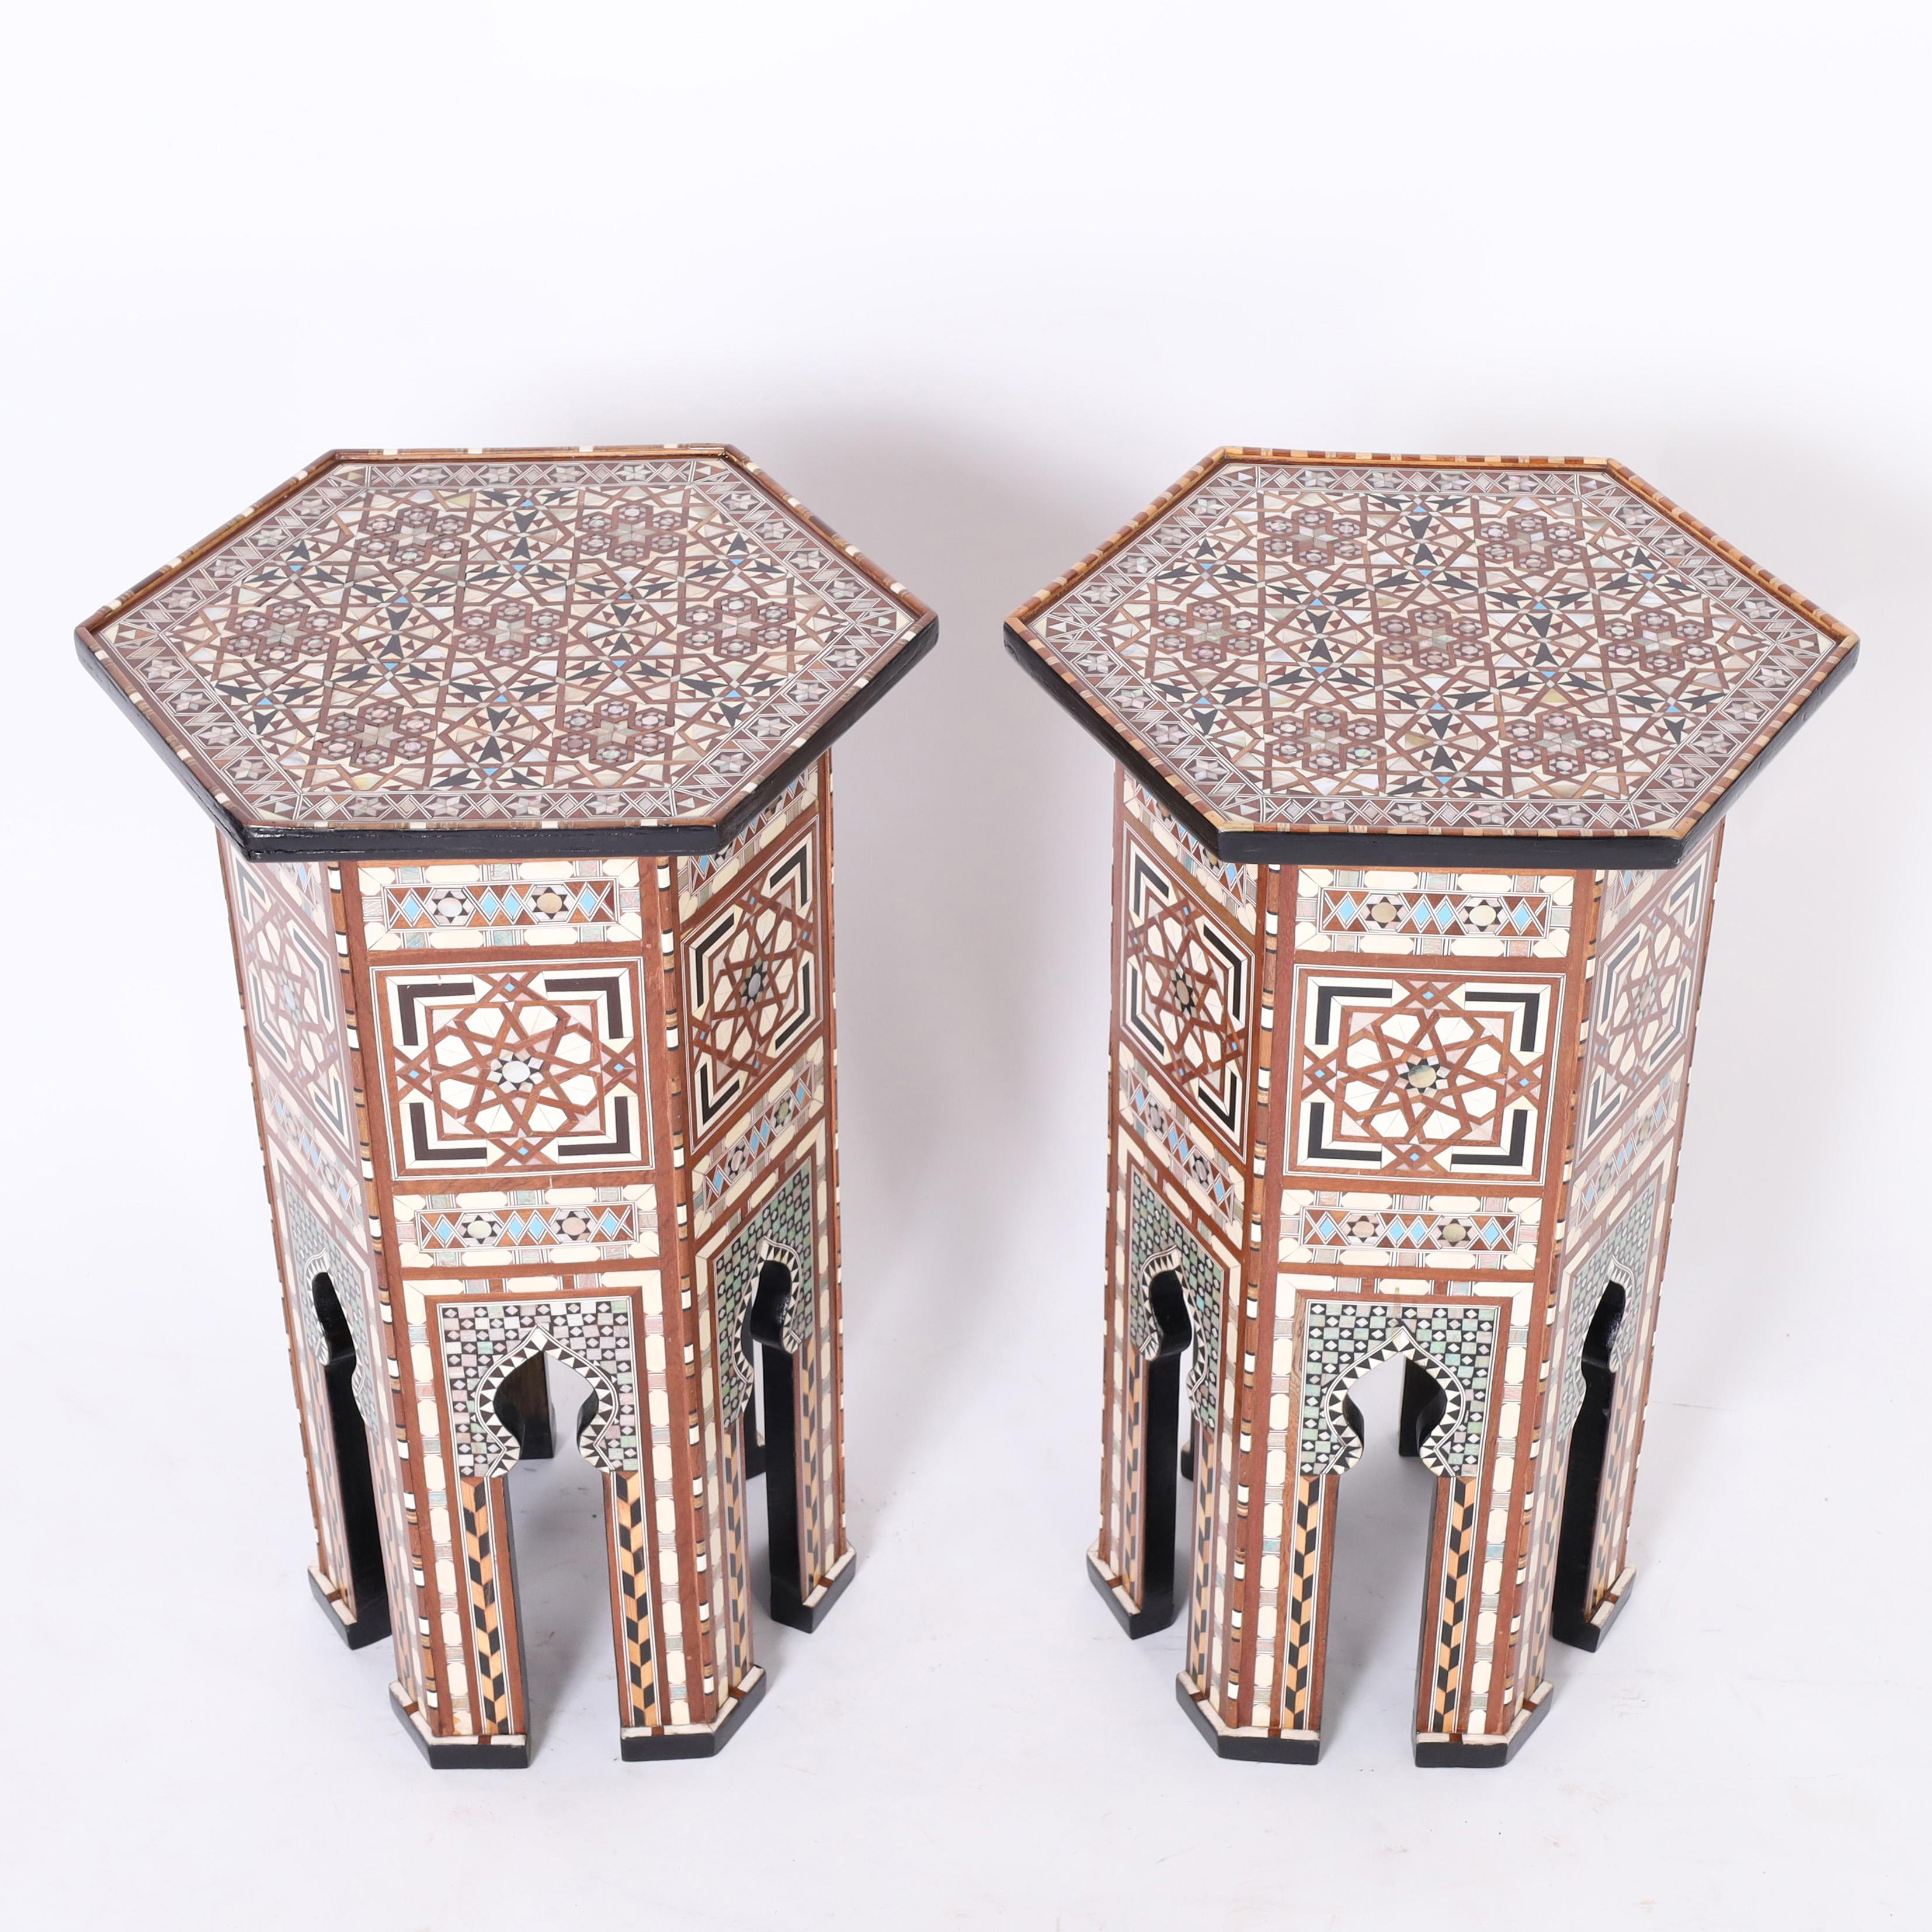 Standout pair of Moroccan stands or pedestals crafted in mahogany in a hexagon form with classic moorish arches and clad in elaborate inlaid marquetry of mother of pearl, ebony, bone, and blue painted bone in geometric designs. 